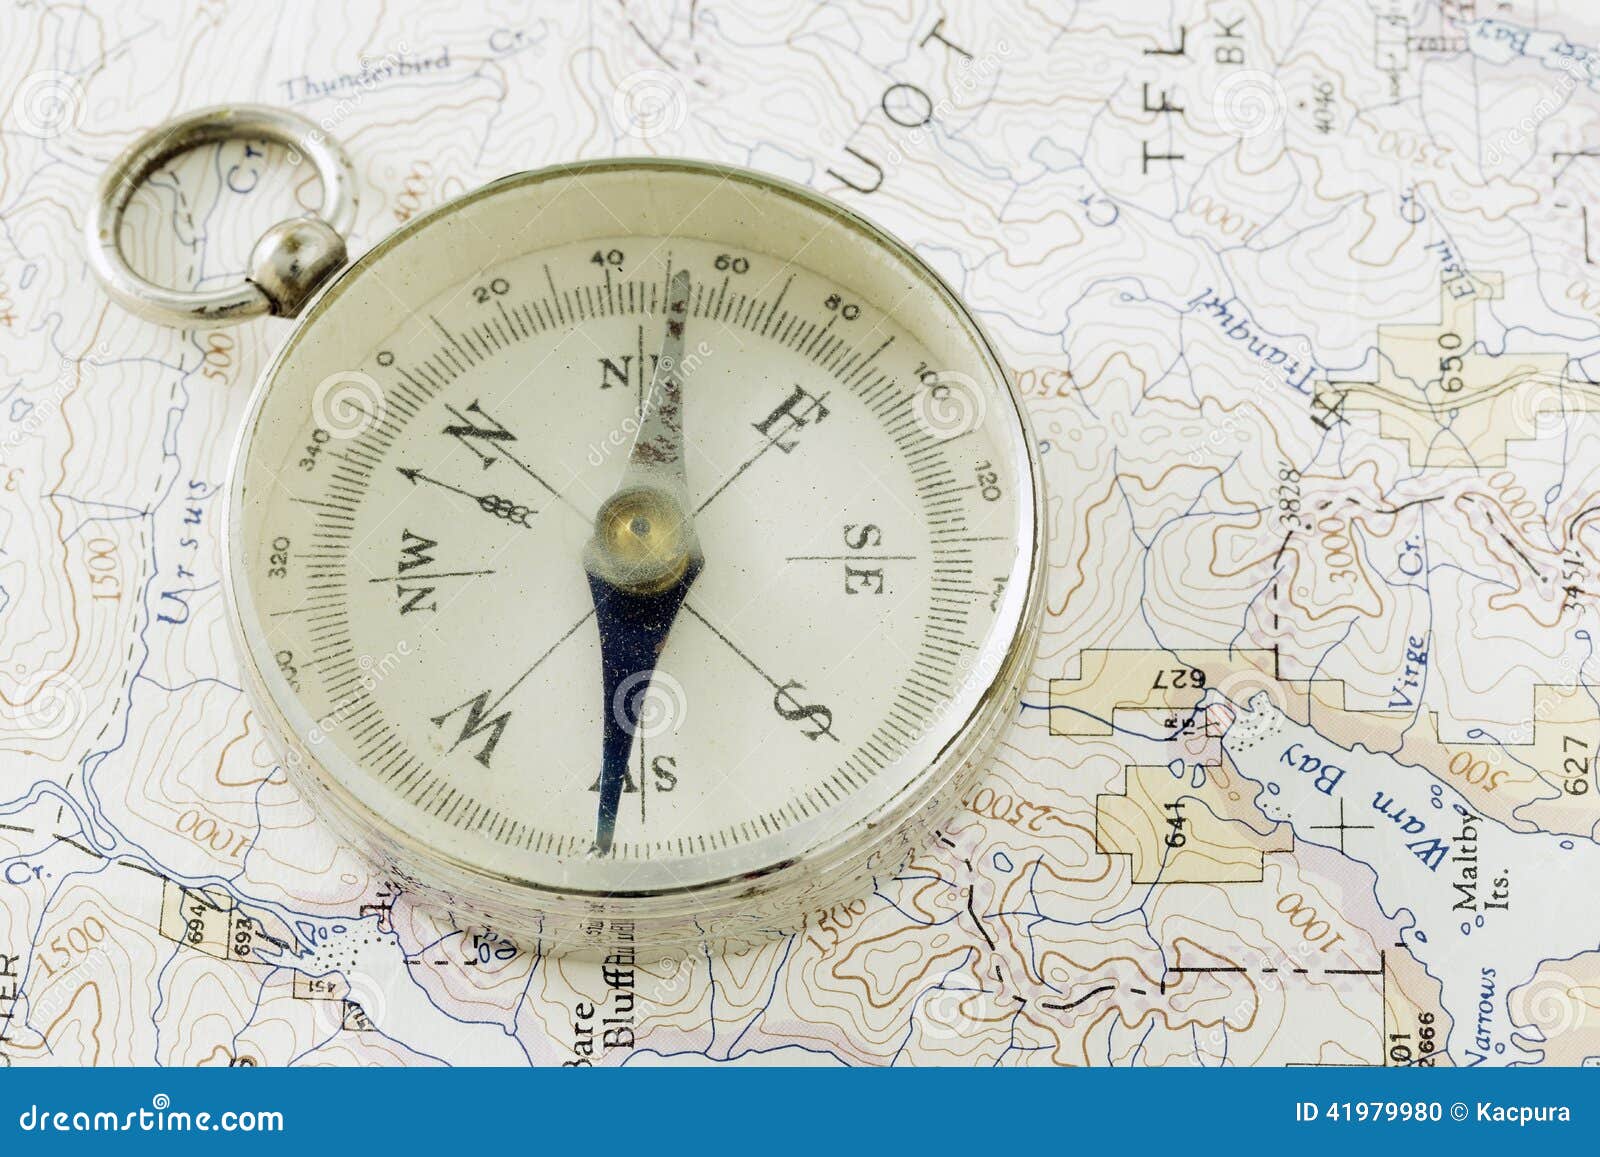 antique compass, prospecting map, and gold